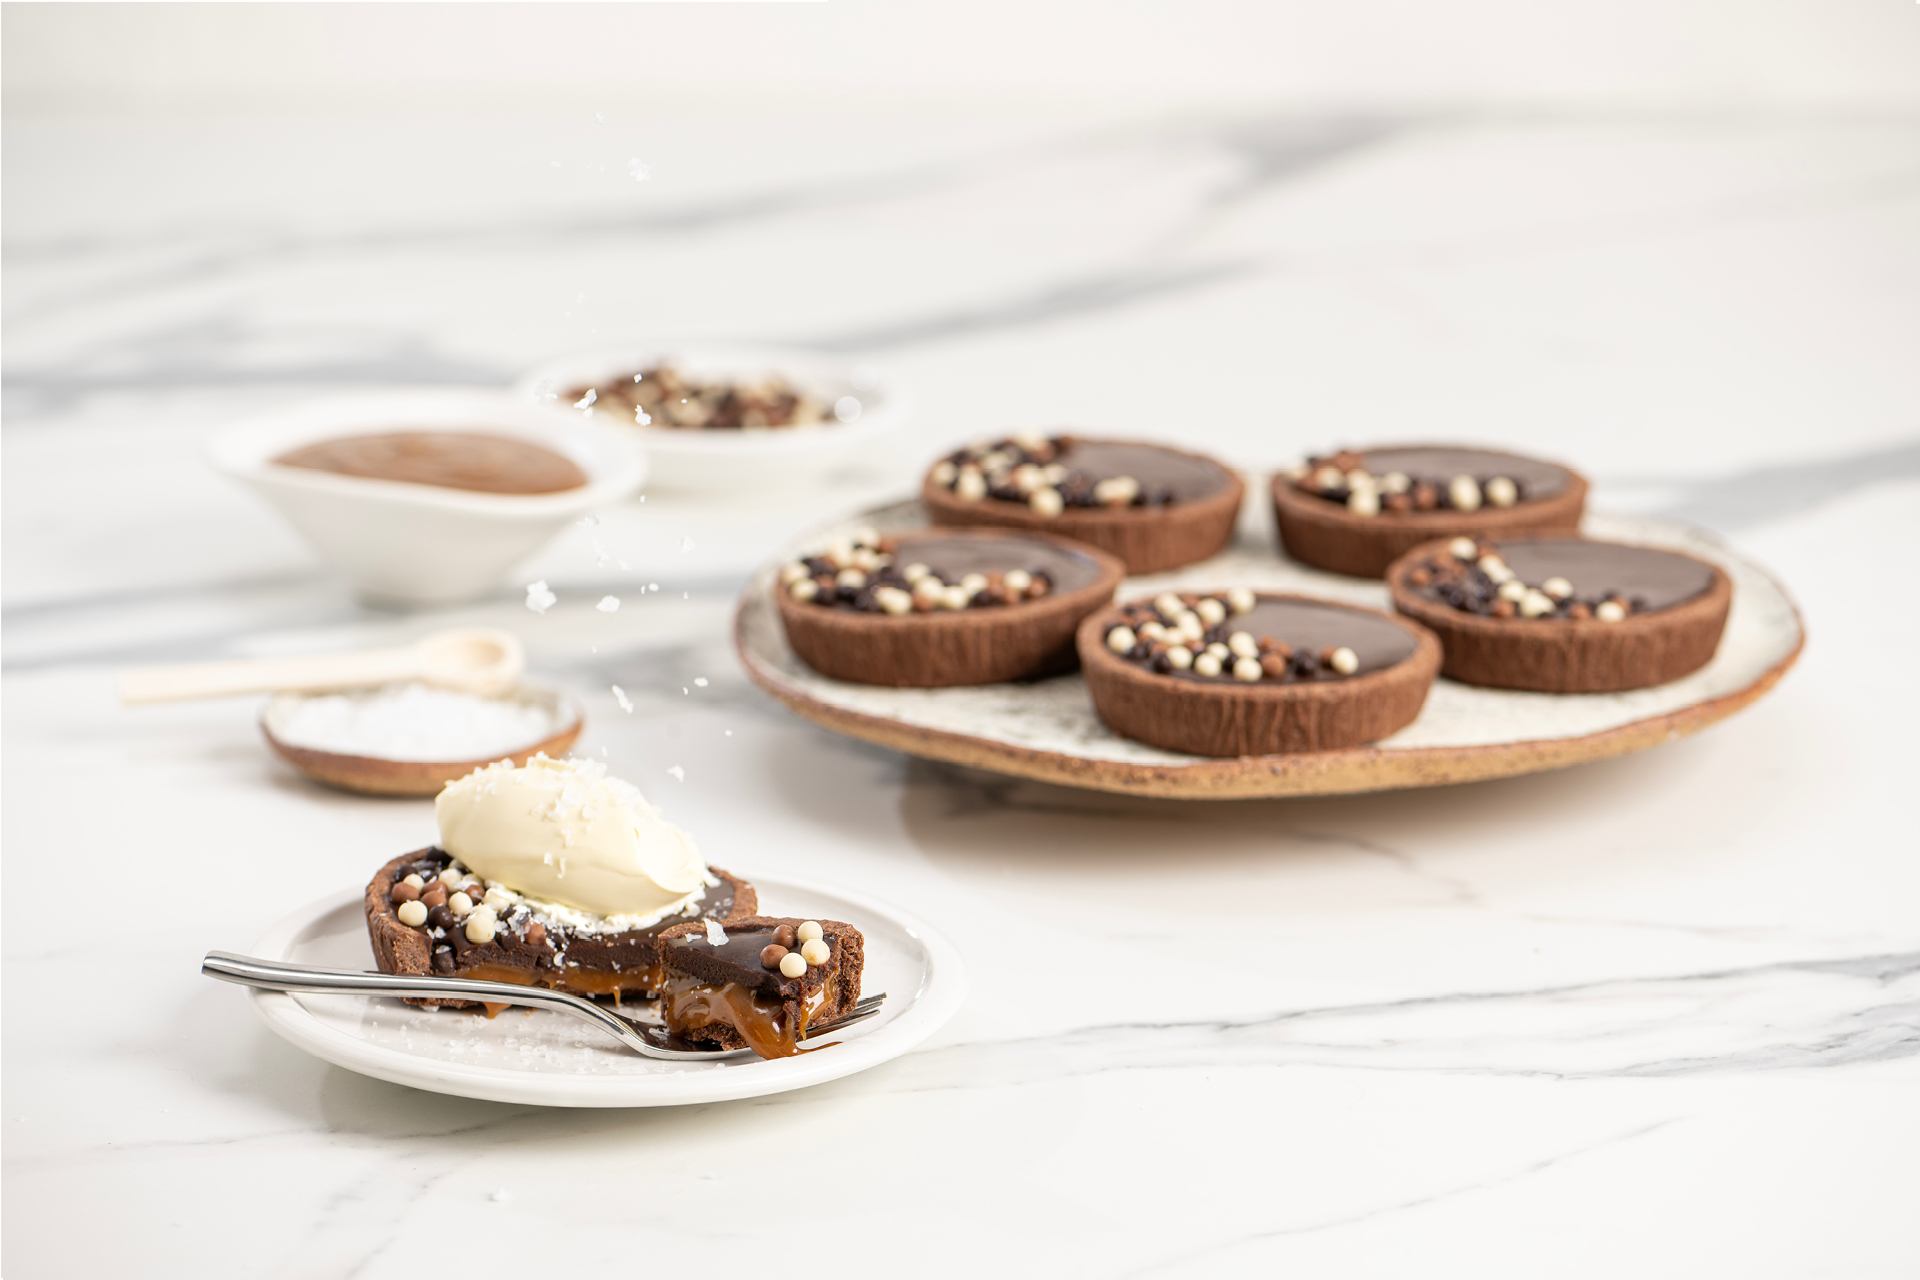 Priestley's Choc Salted Caramel Tart and how to use consumer trends to make money